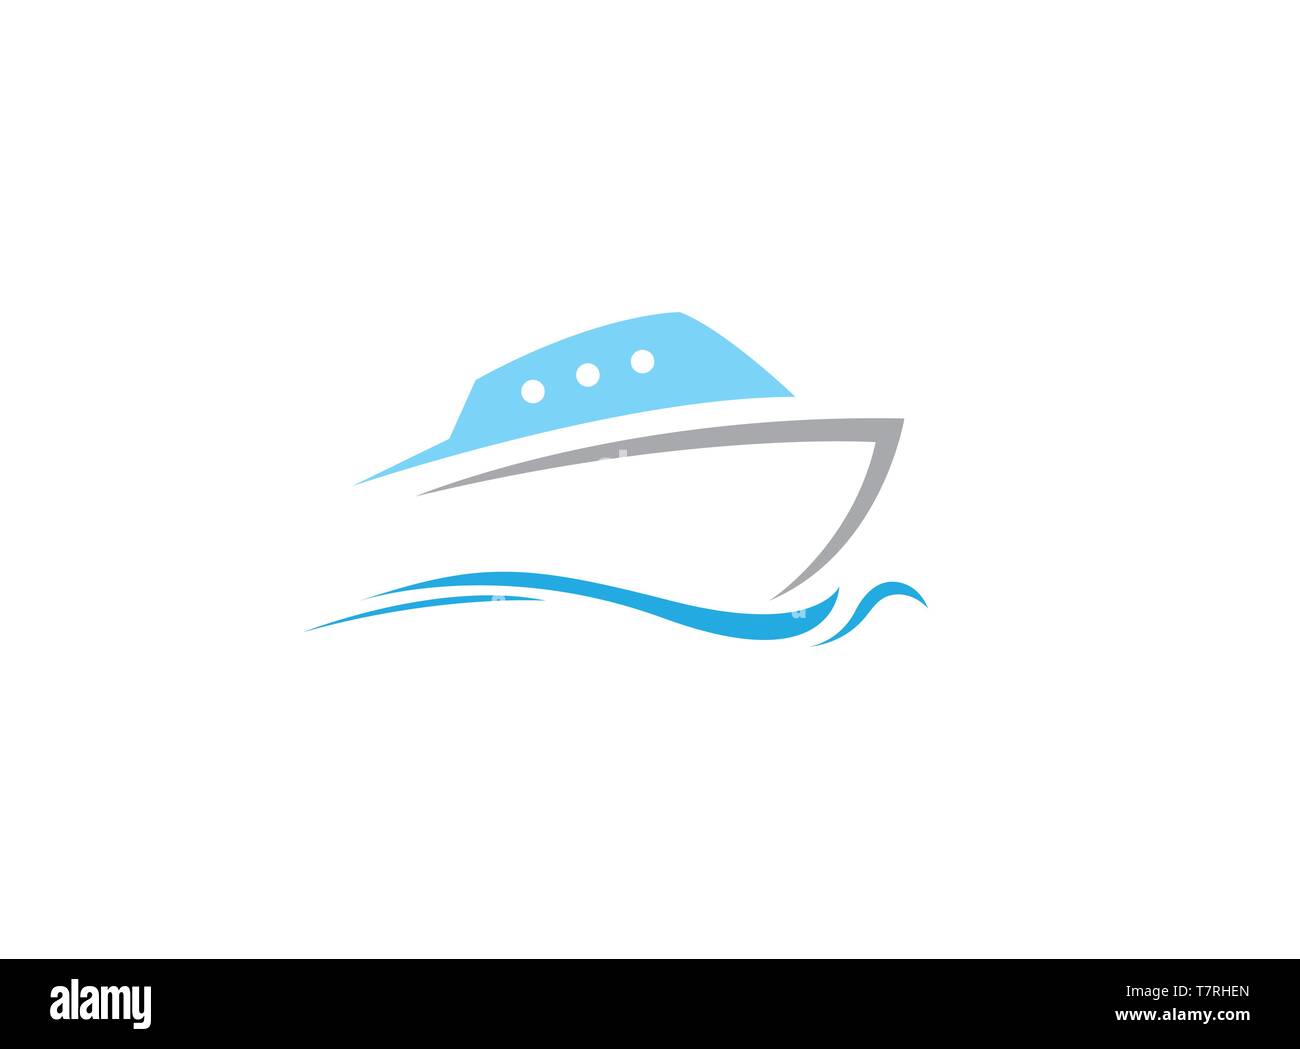 speed sailing boat in the sea logo design illustration, yacht symbol vector on white background Stock Vector